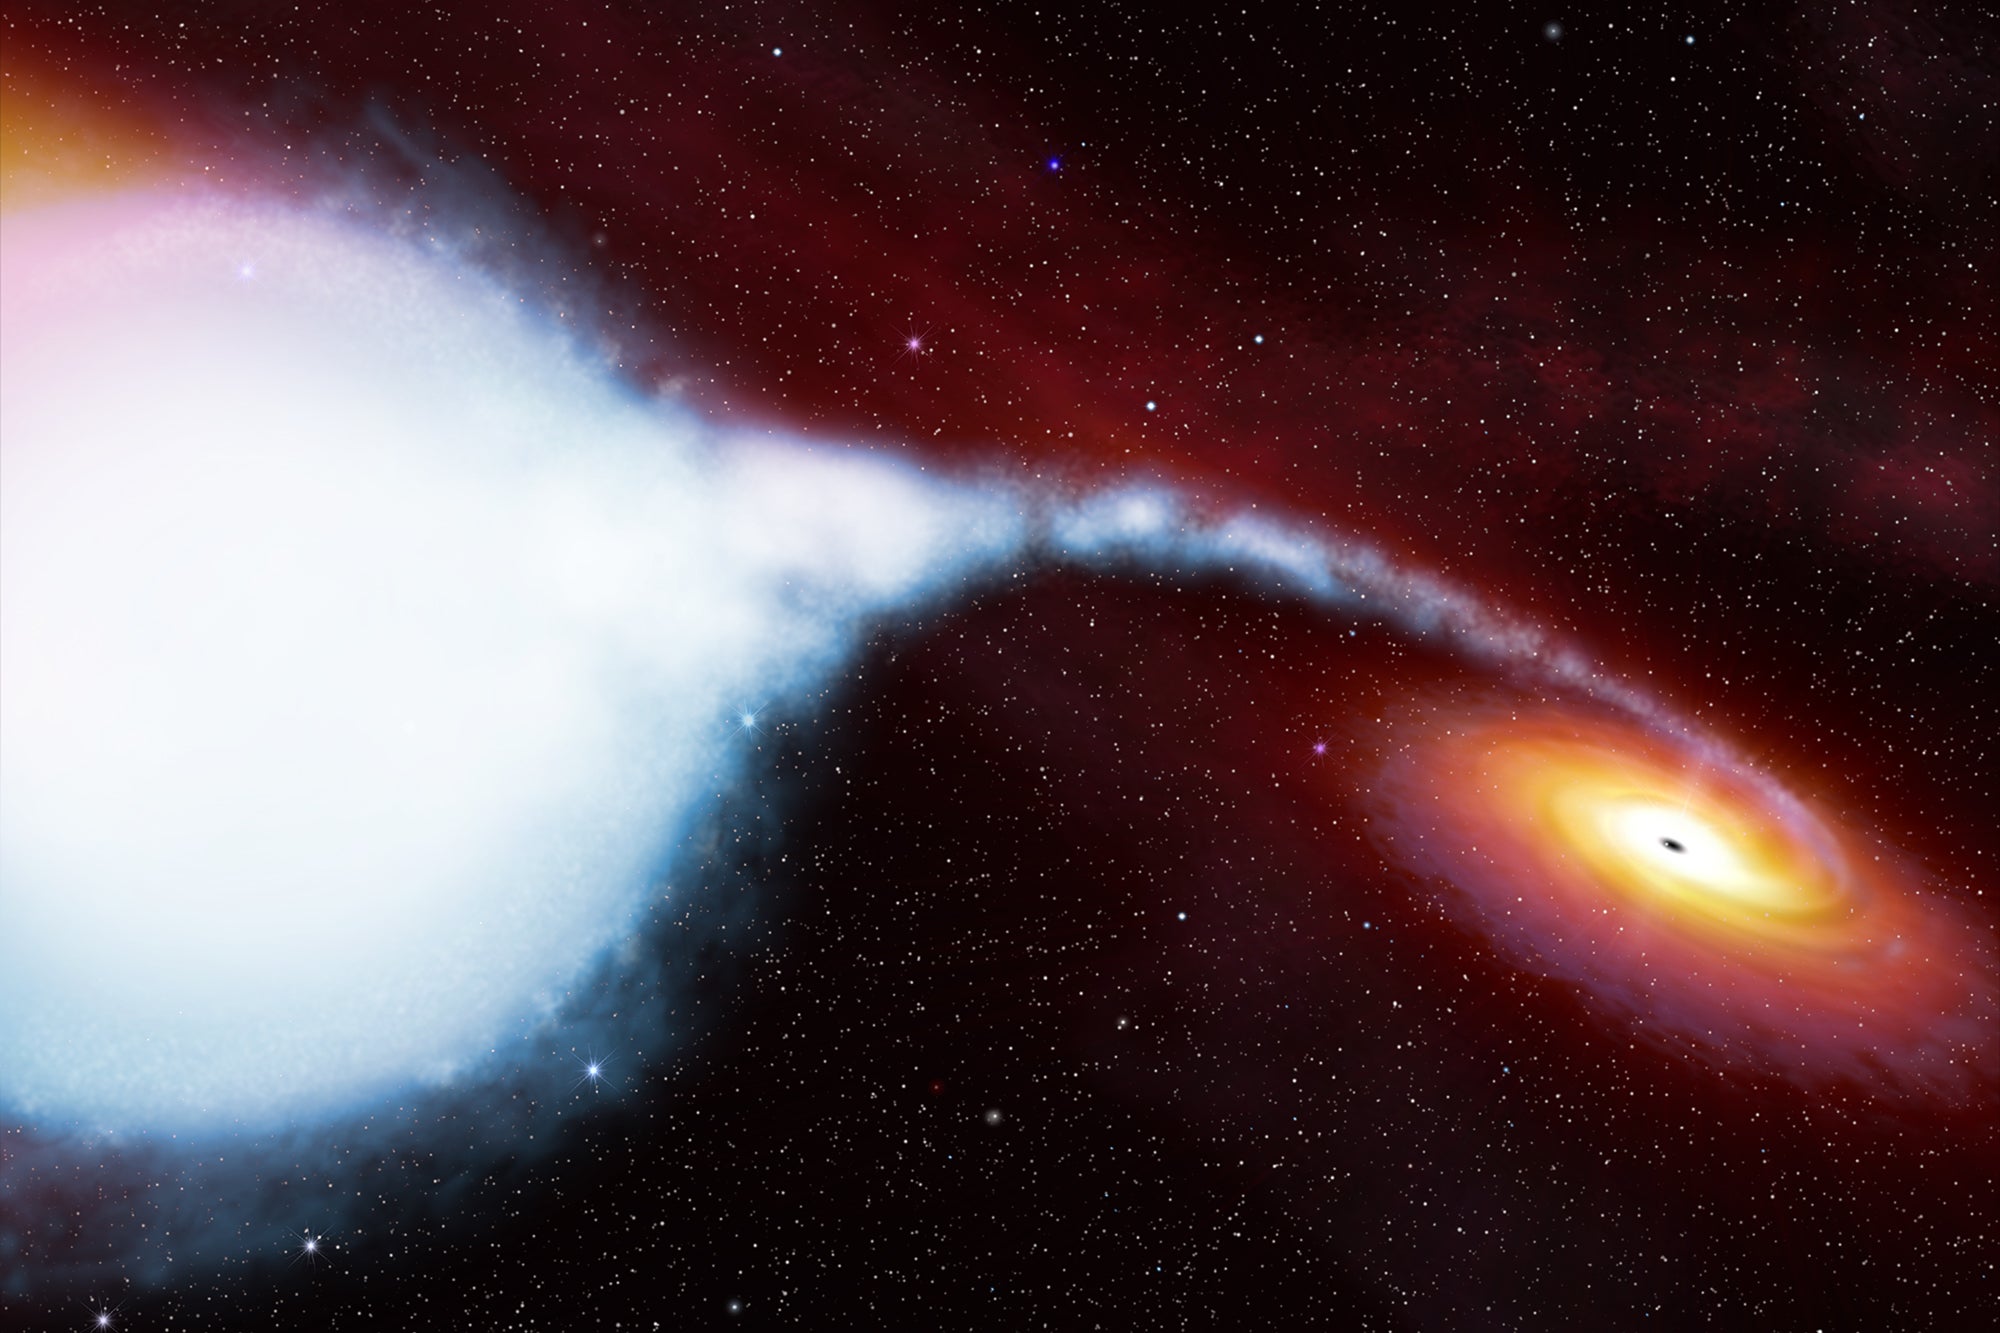 Artist impression of the black hole Cygnus X-1 pulling matter away from its companion blue supergiant star, HDE 226868.